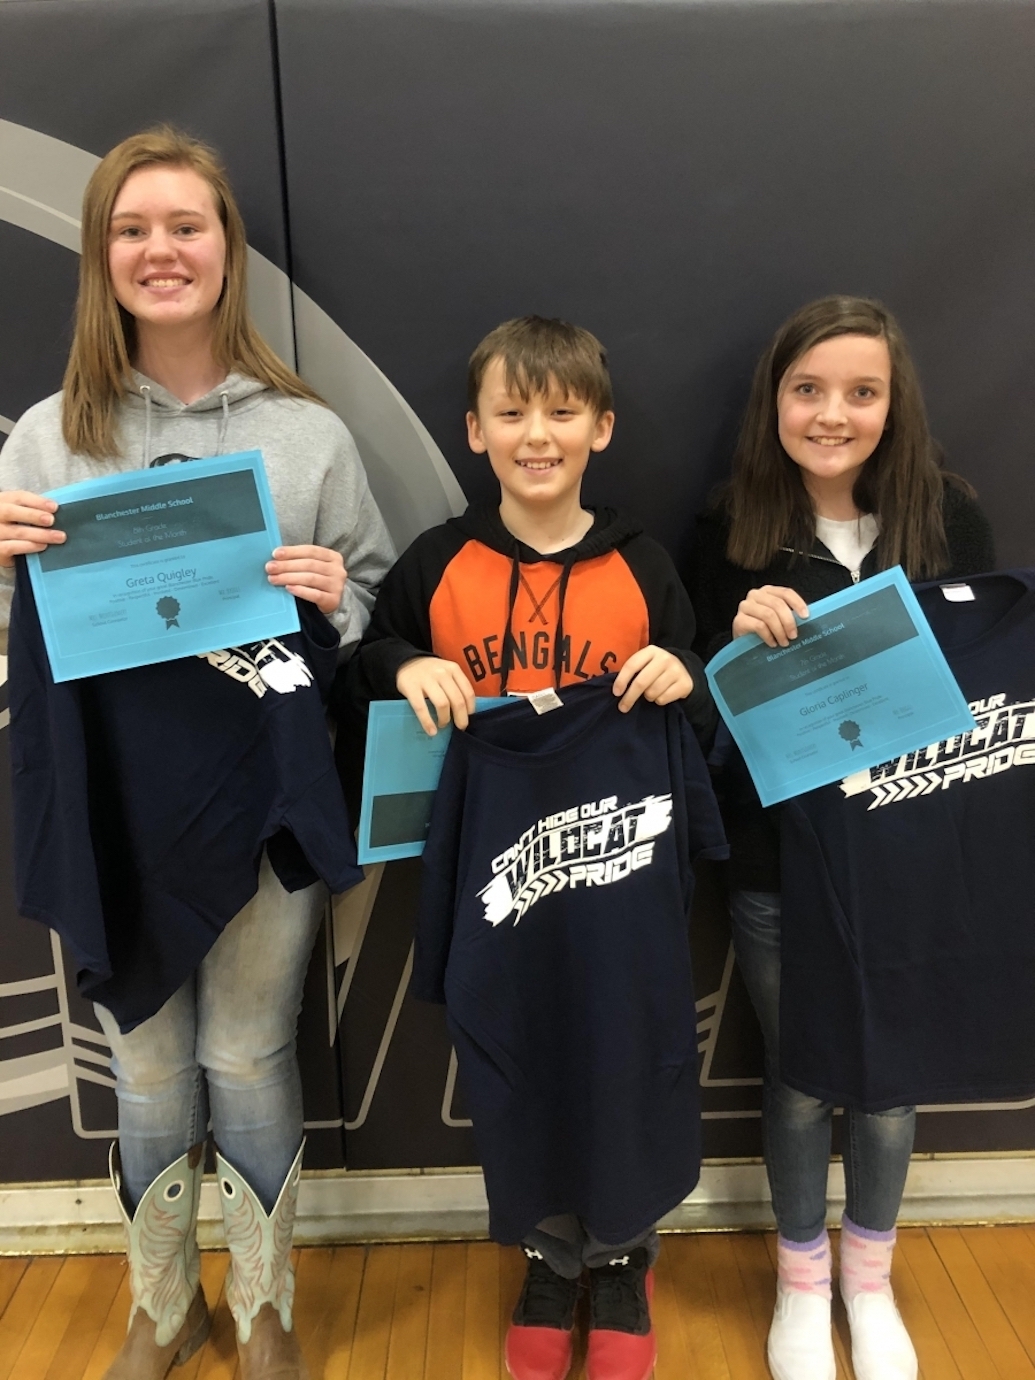 Greta, Aiden, and Gloria holding shirts and certificates